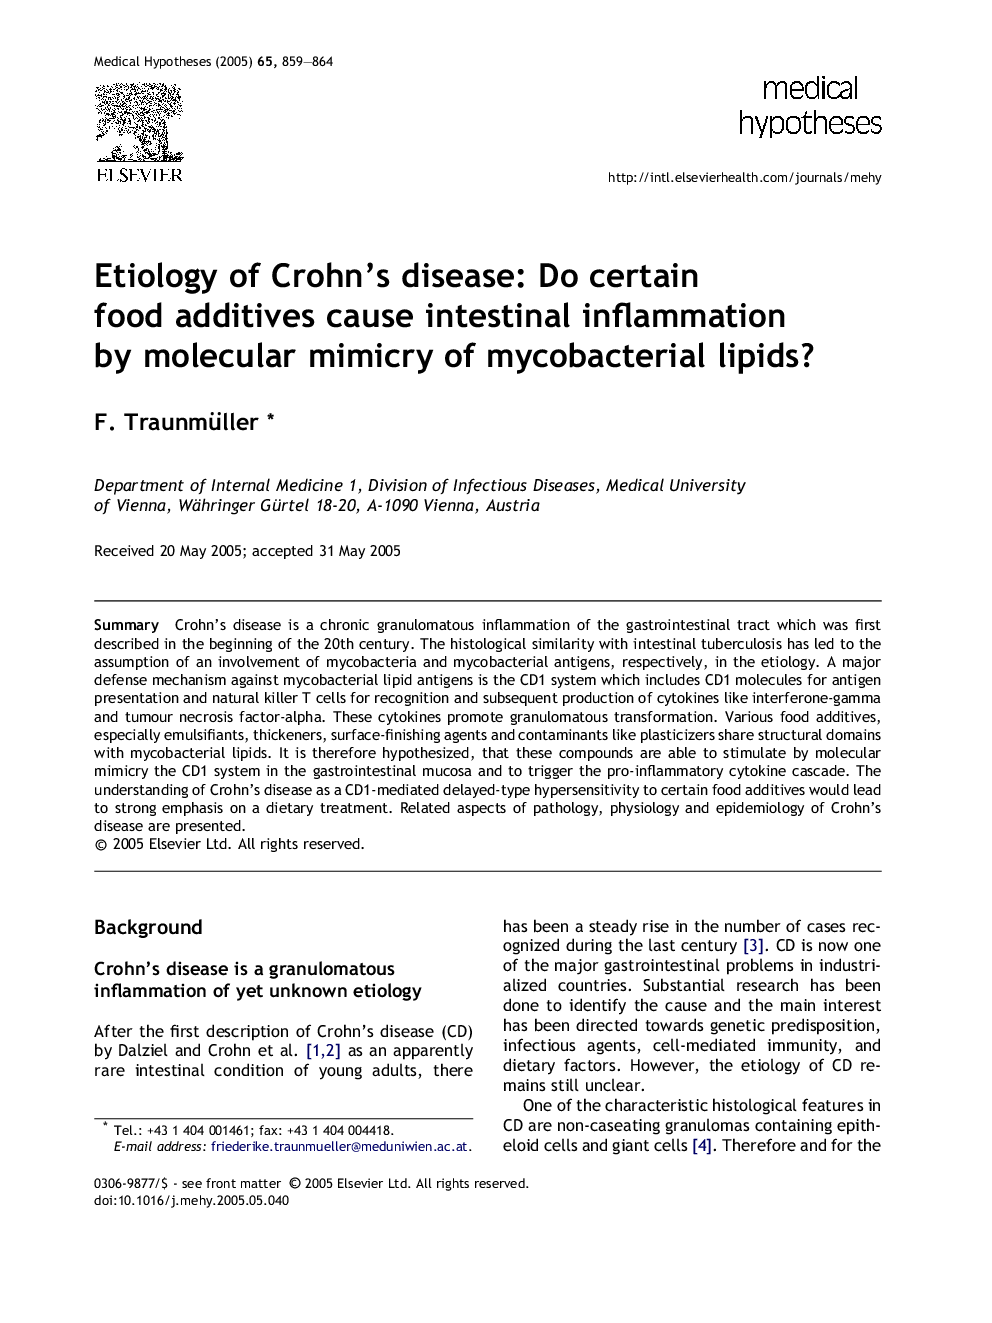 Etiology of Crohn's disease: Do certain food additives cause intestinal inflammation by molecular mimicry of mycobacterial lipids?